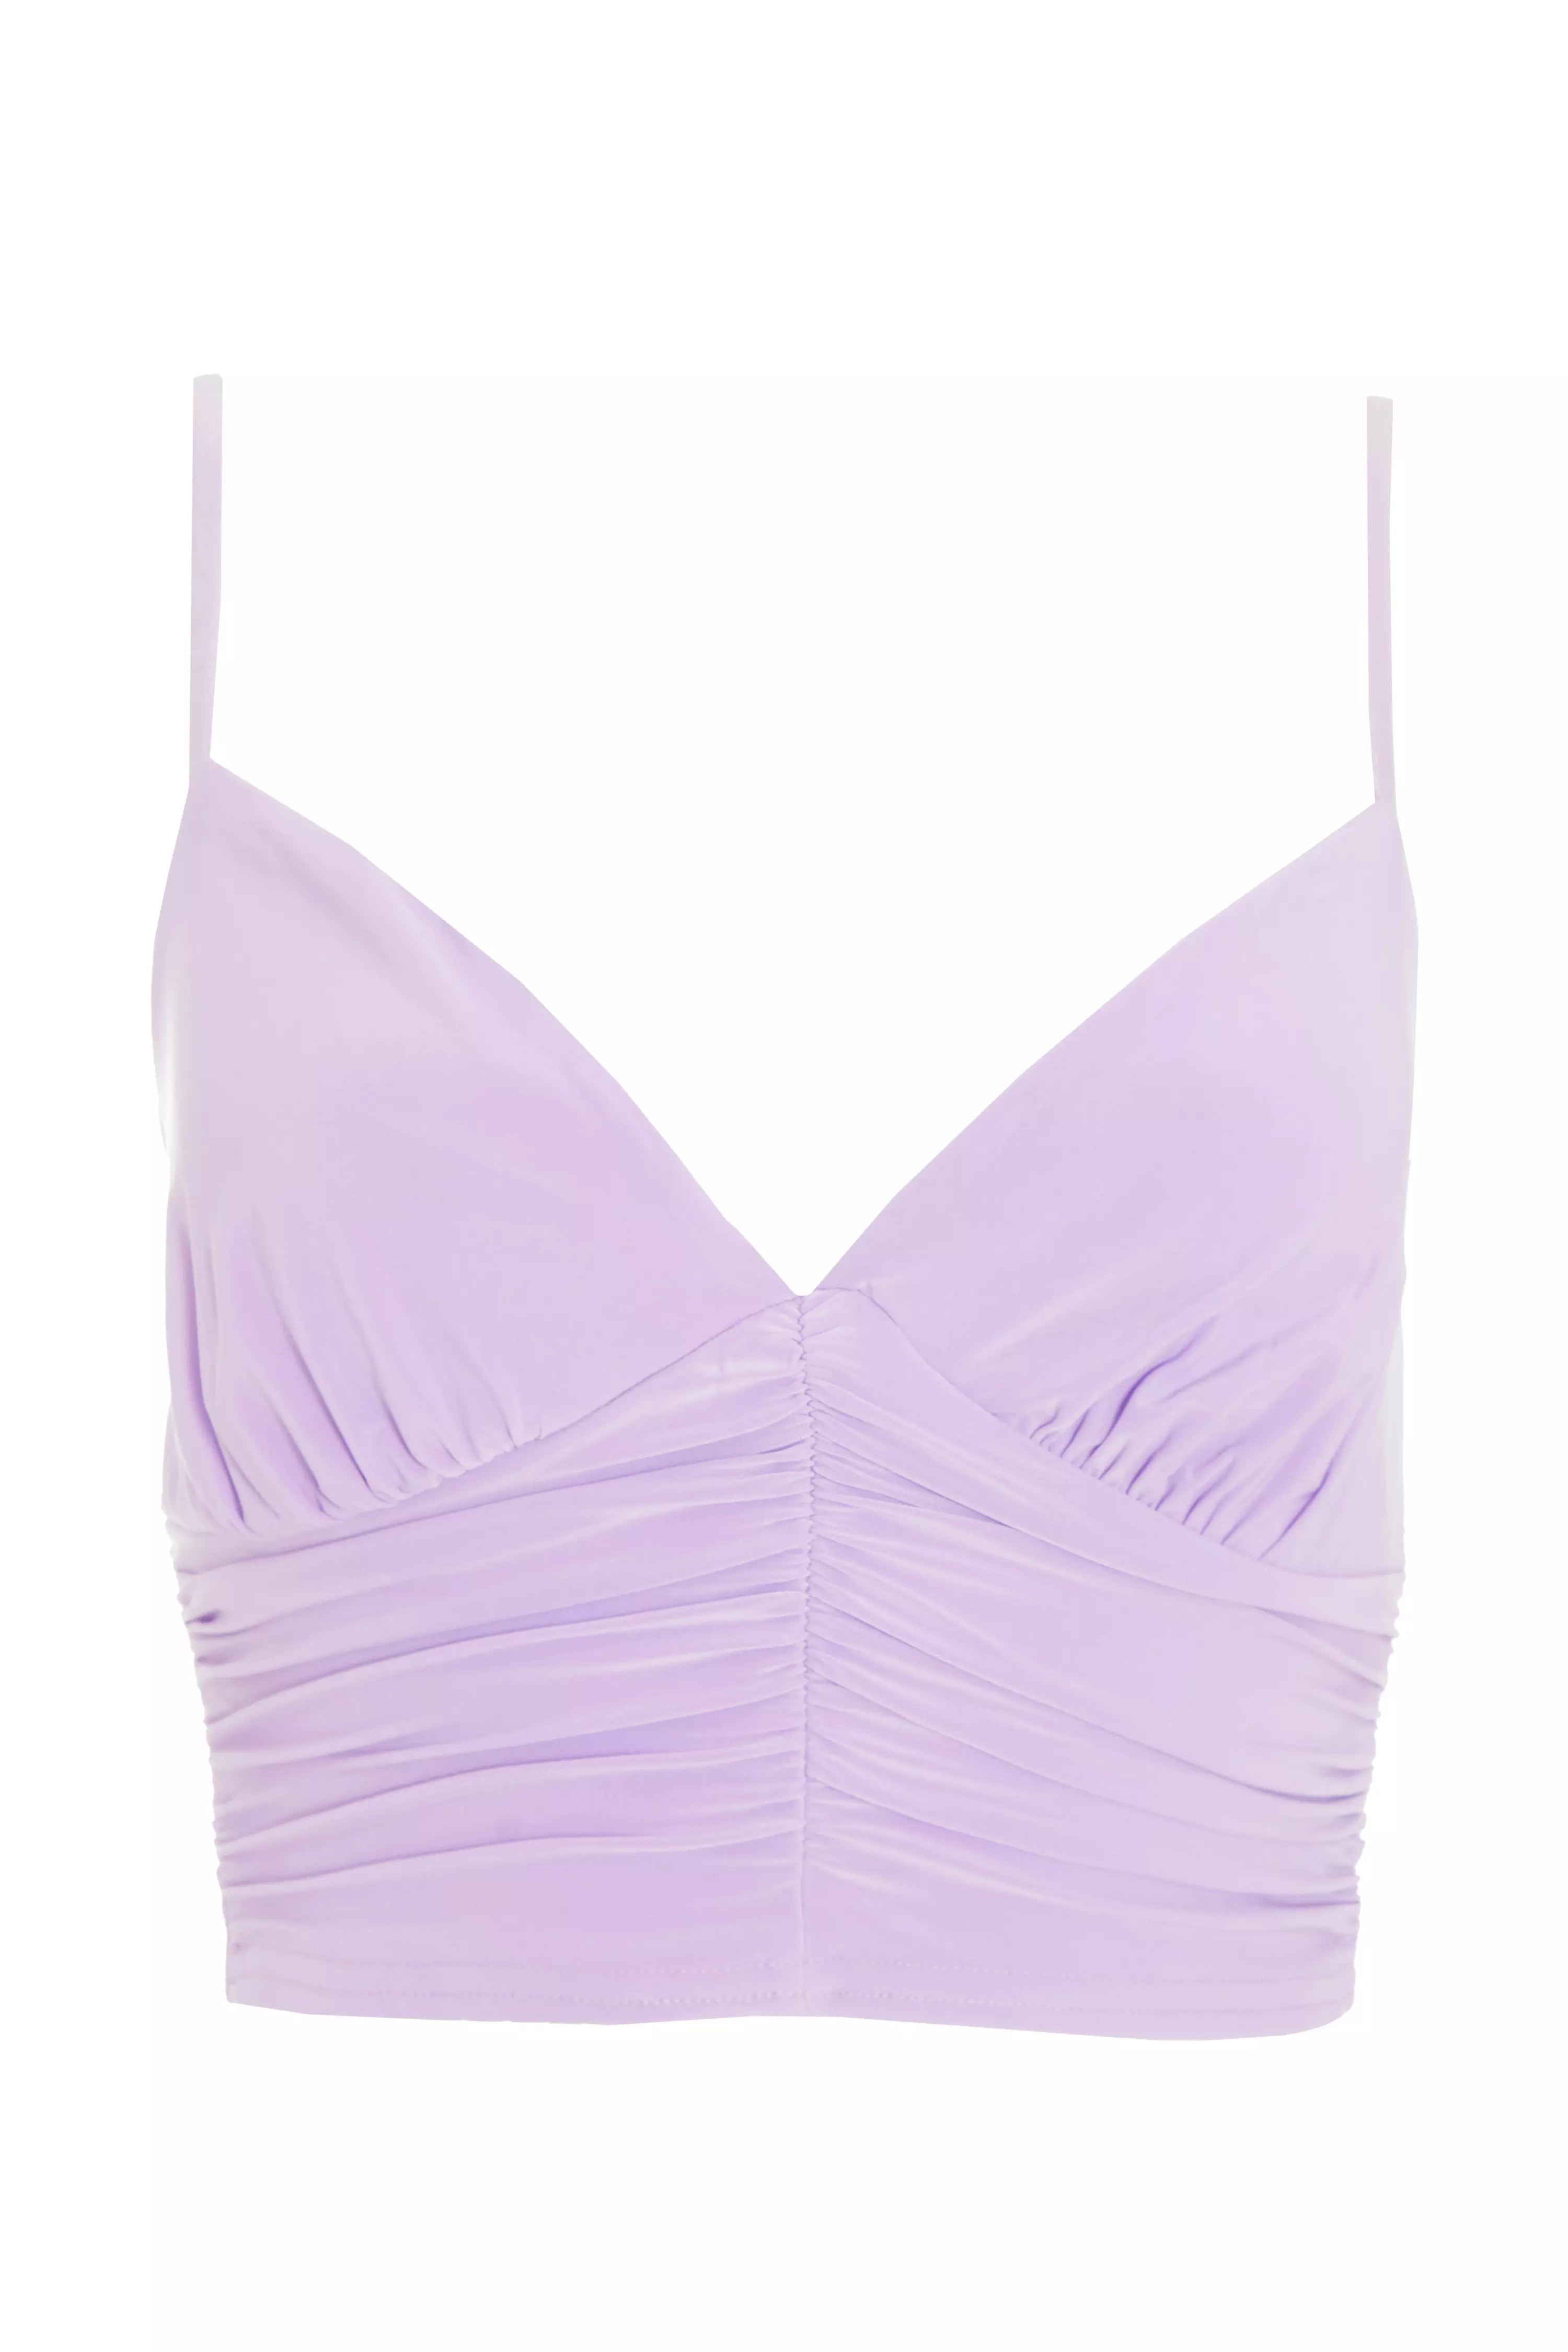 Lilac Ruched Crop Top - QUIZ Clothing